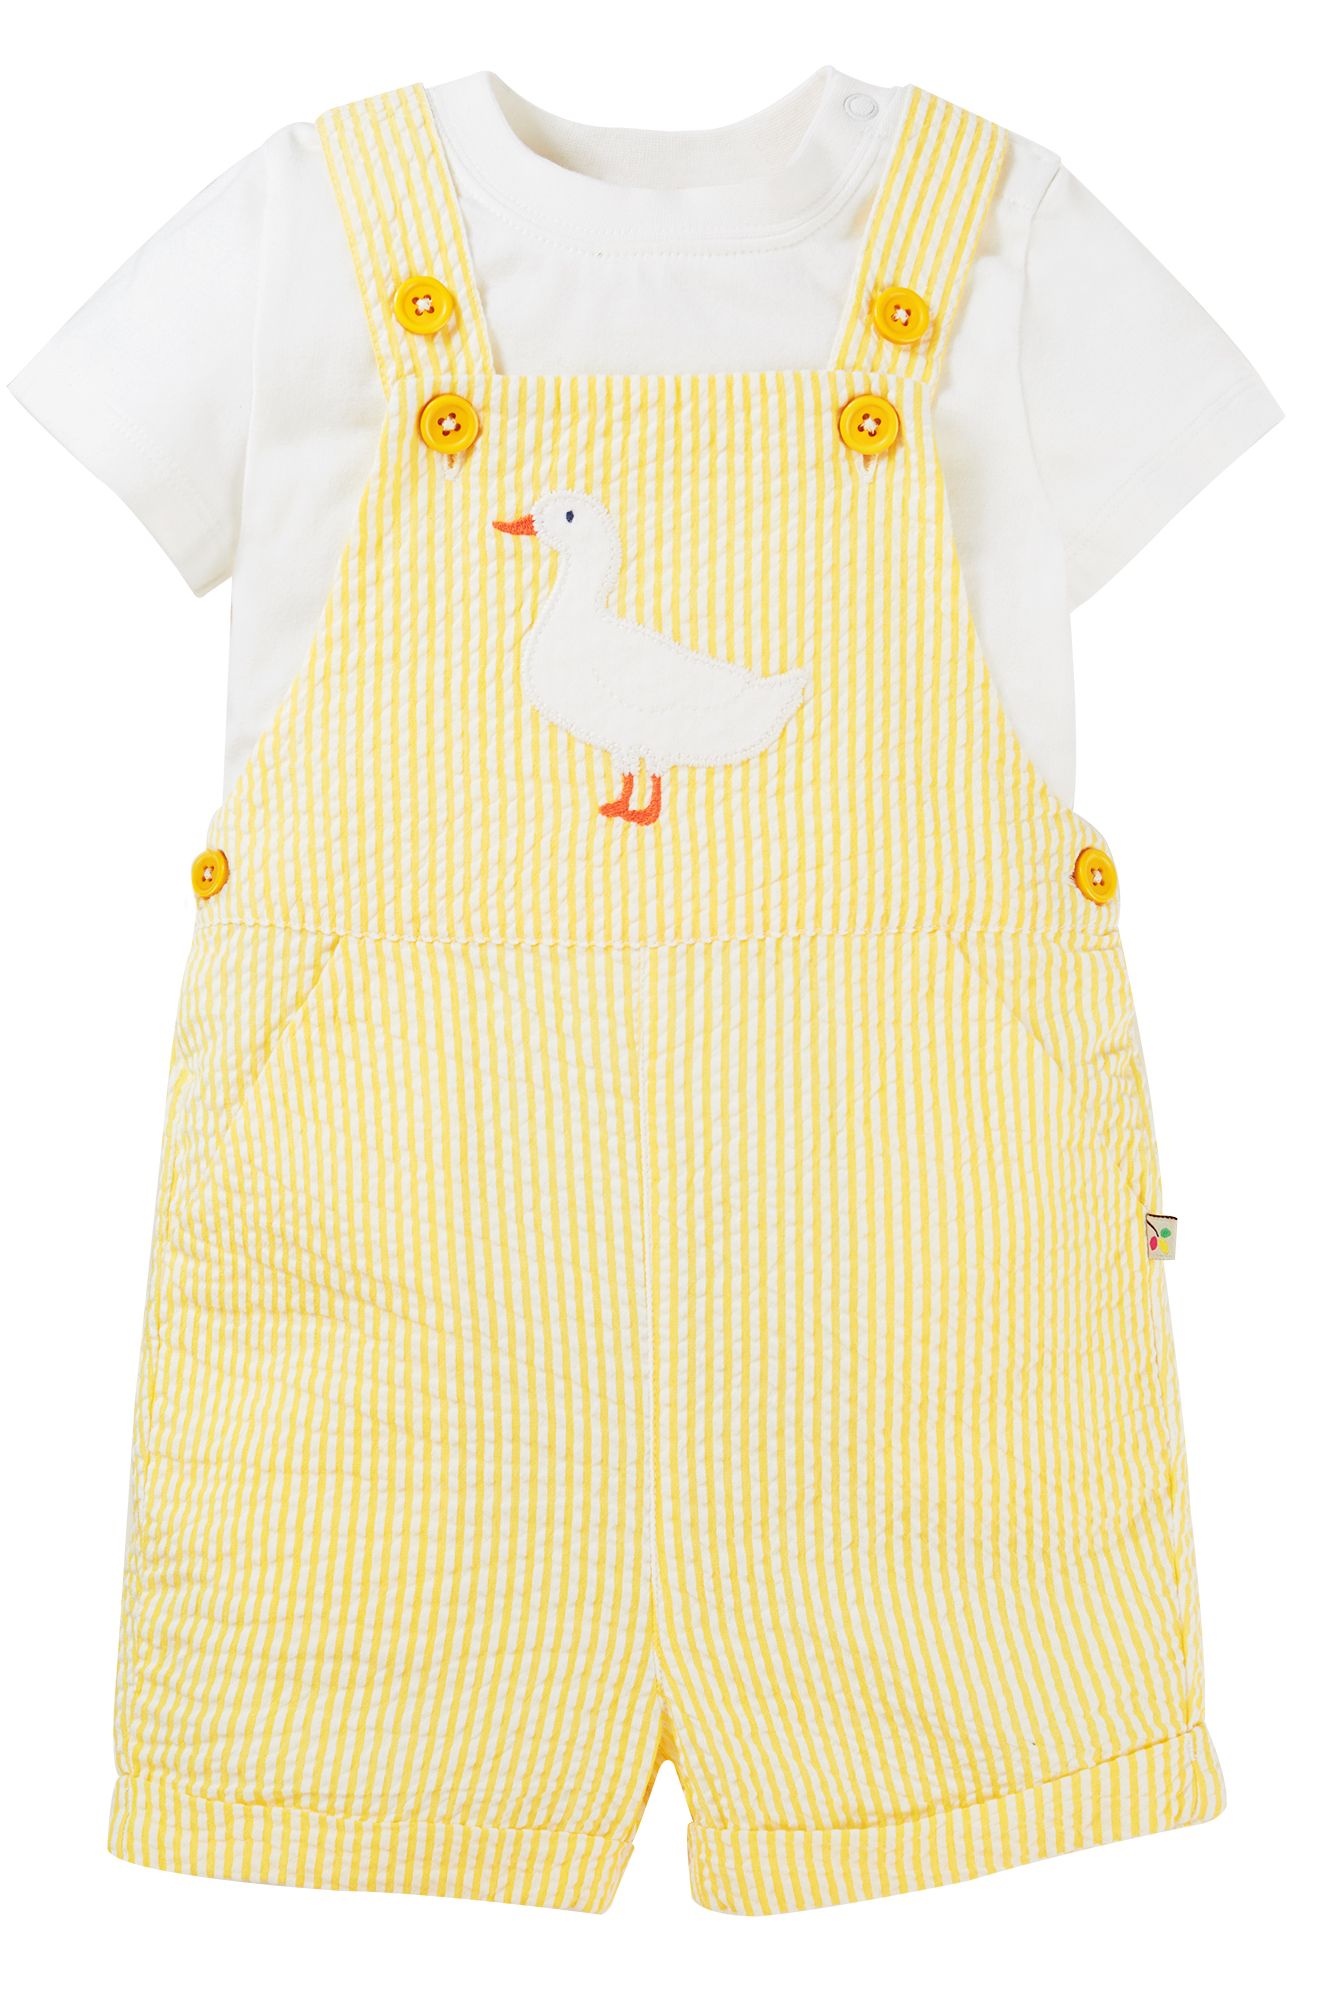 Godrevy Dungaree Outfit